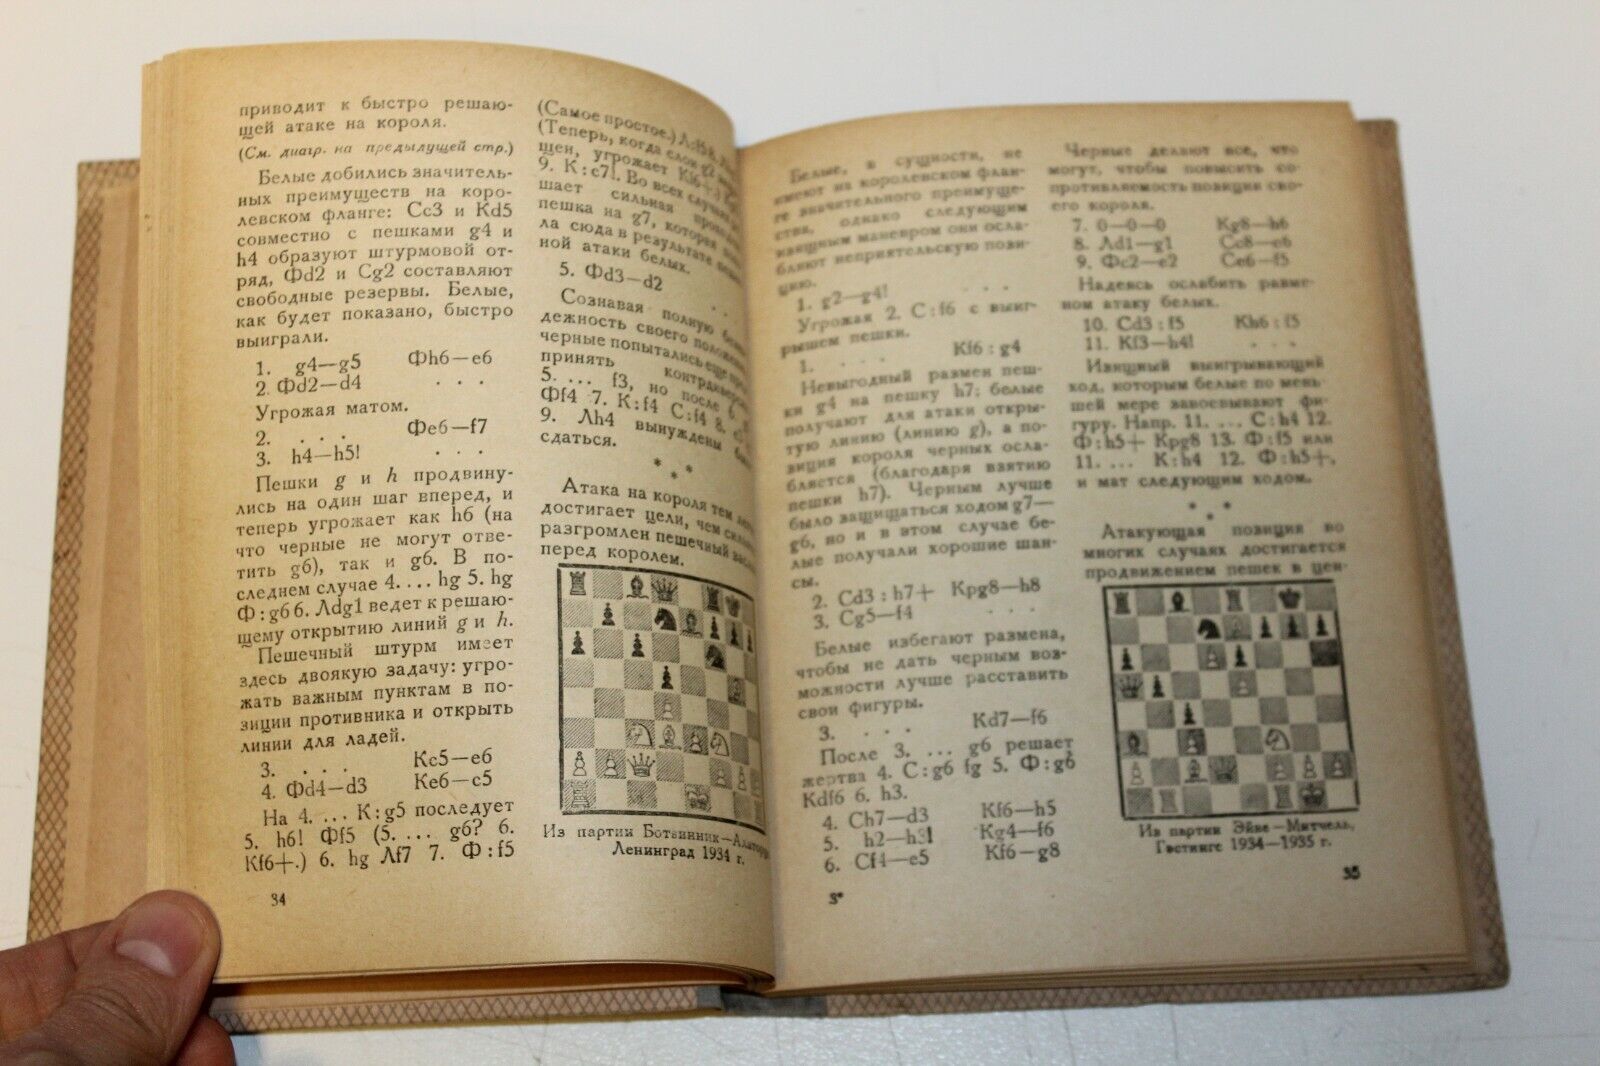 10881.Antique Russian Chess Book: Max Euwe. Strategy and tactics. 1937